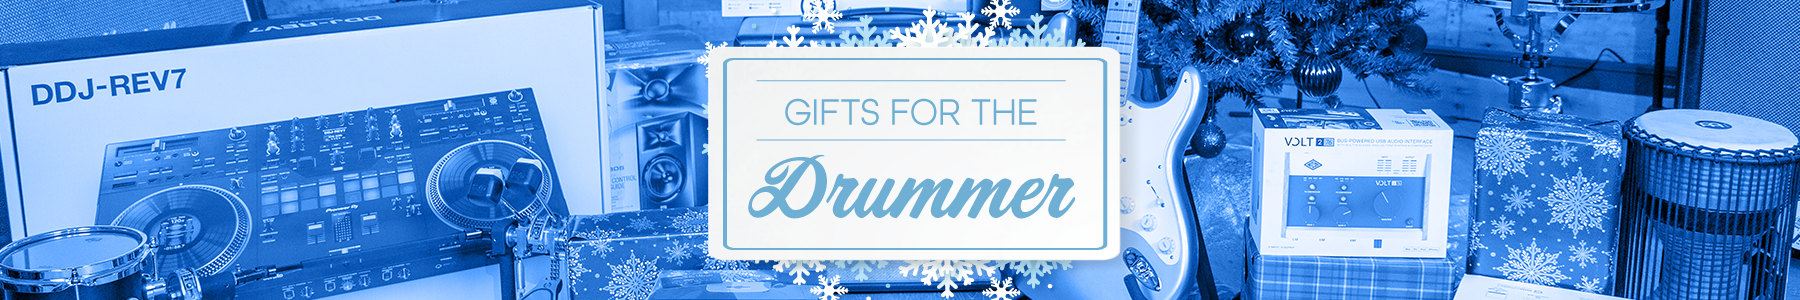 Gifts for the drummer